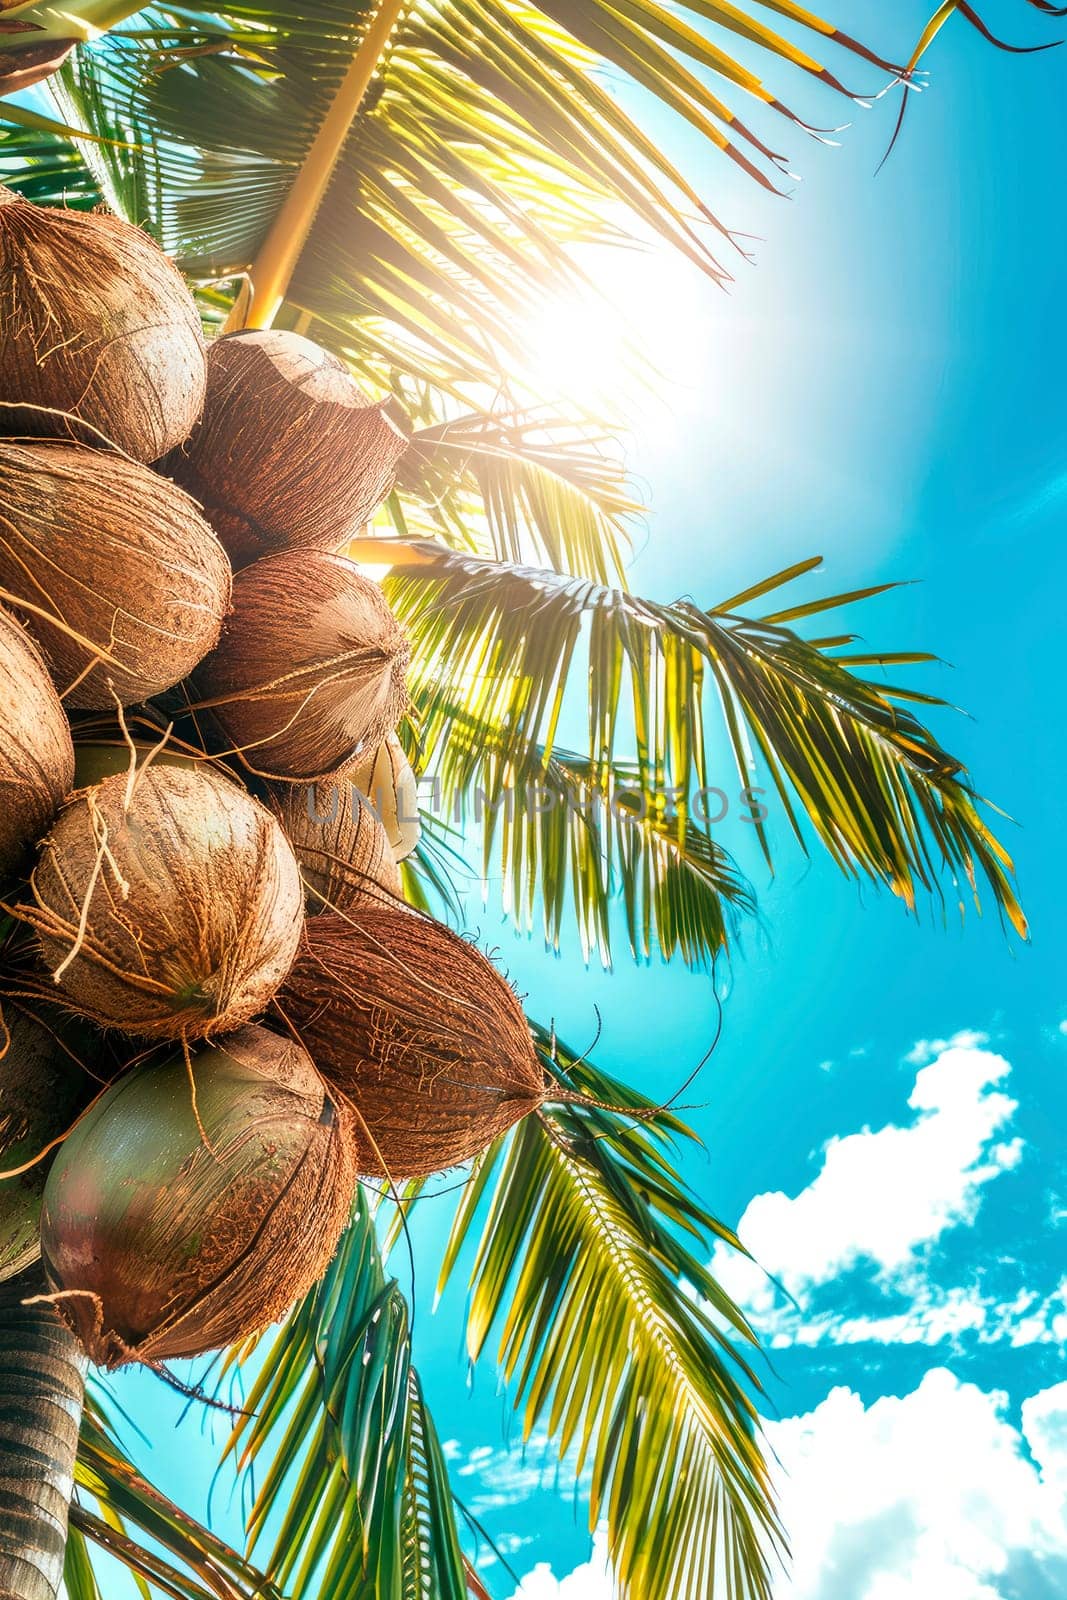 coconut on a background of palm trees and sky. selective focus. nature.